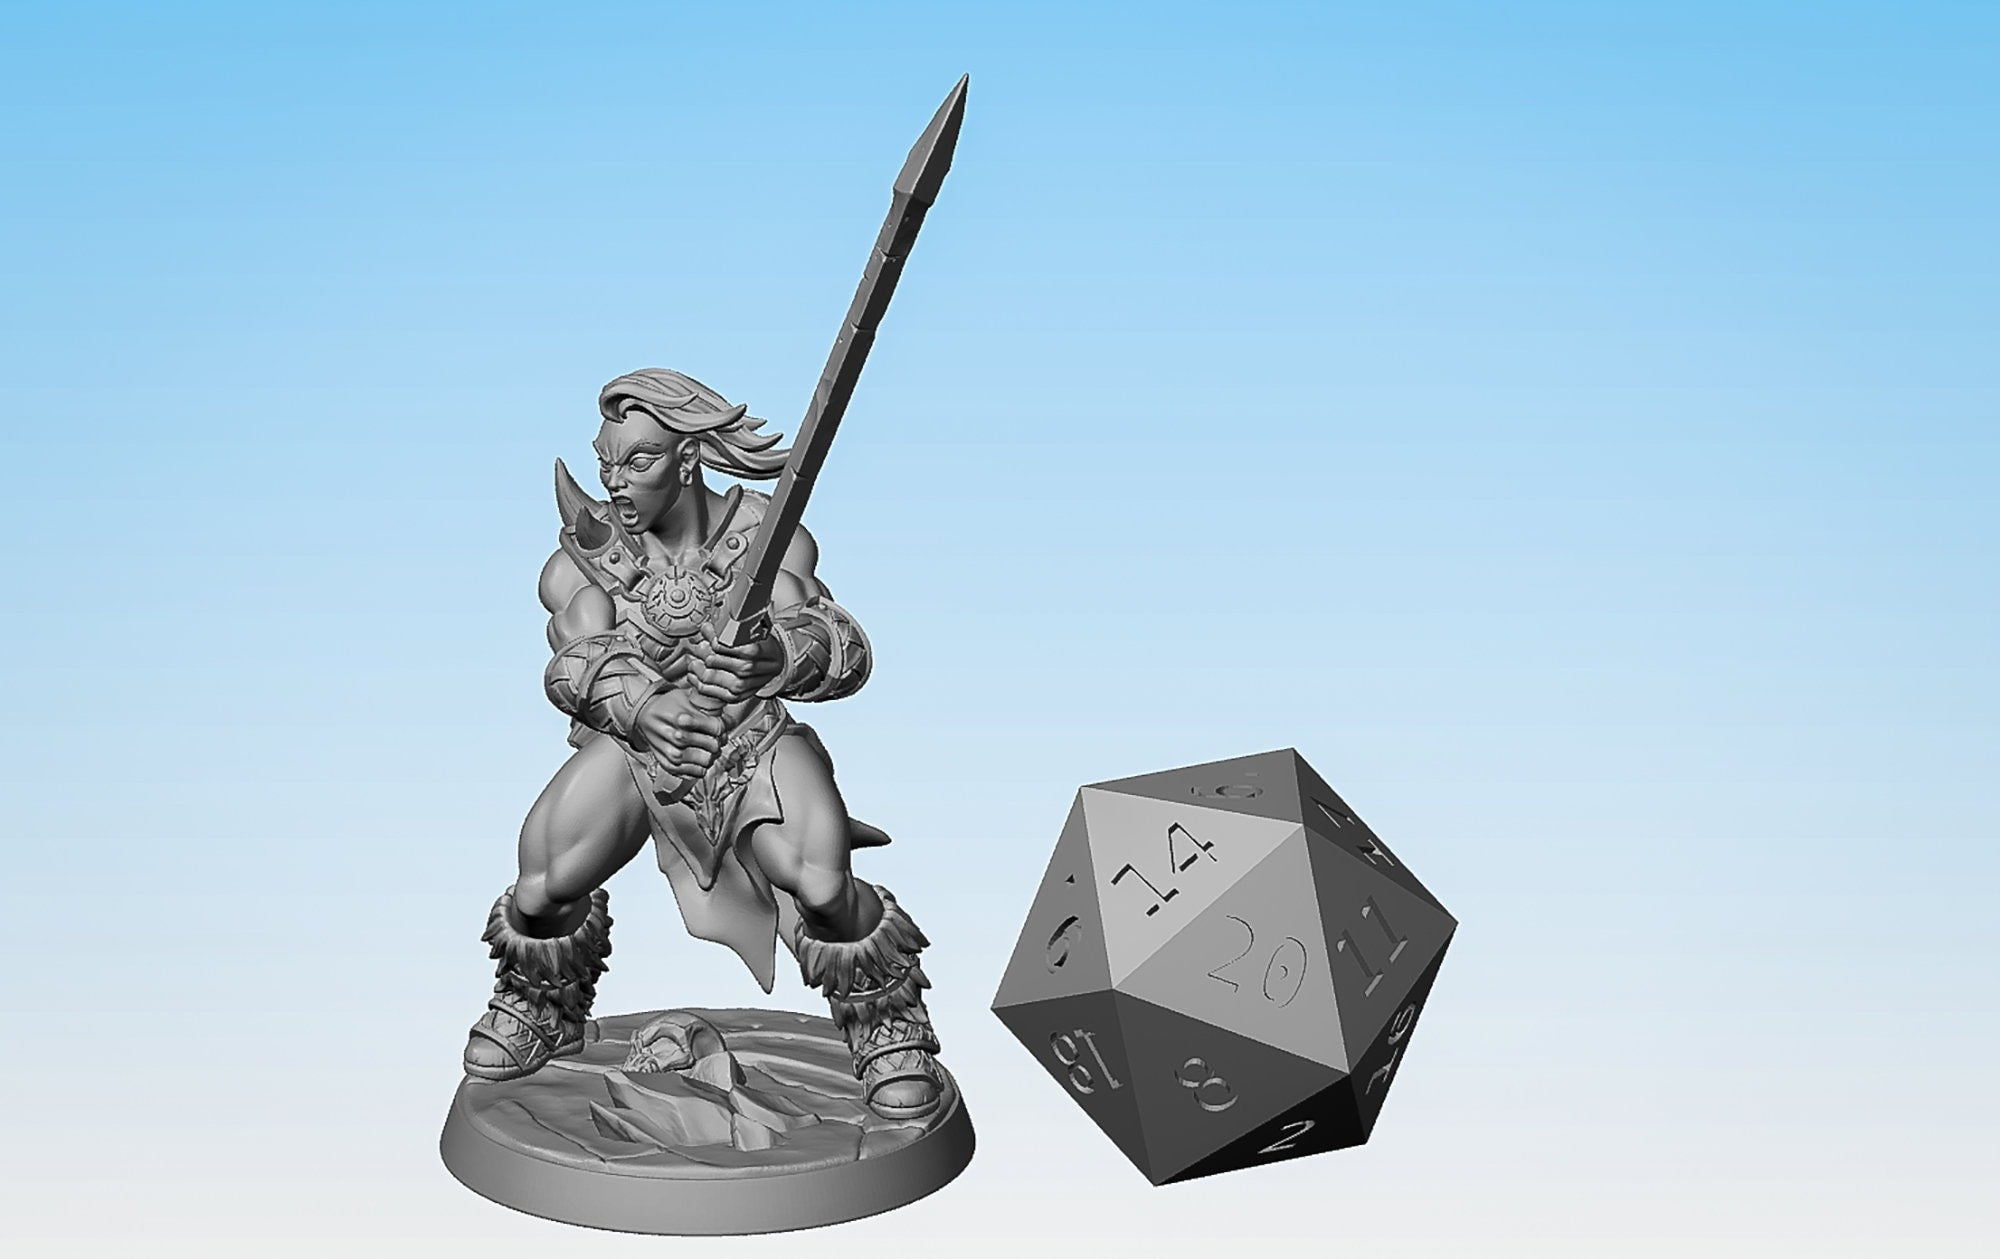 BARBARIAN 2h Sword "Dragonpeak Barbarian D (f)" | Dungeons and Dragons | DnD | Pathfinder | Tabletop | RPG | Hero Size | 28 mm-Role Playing Miniatures